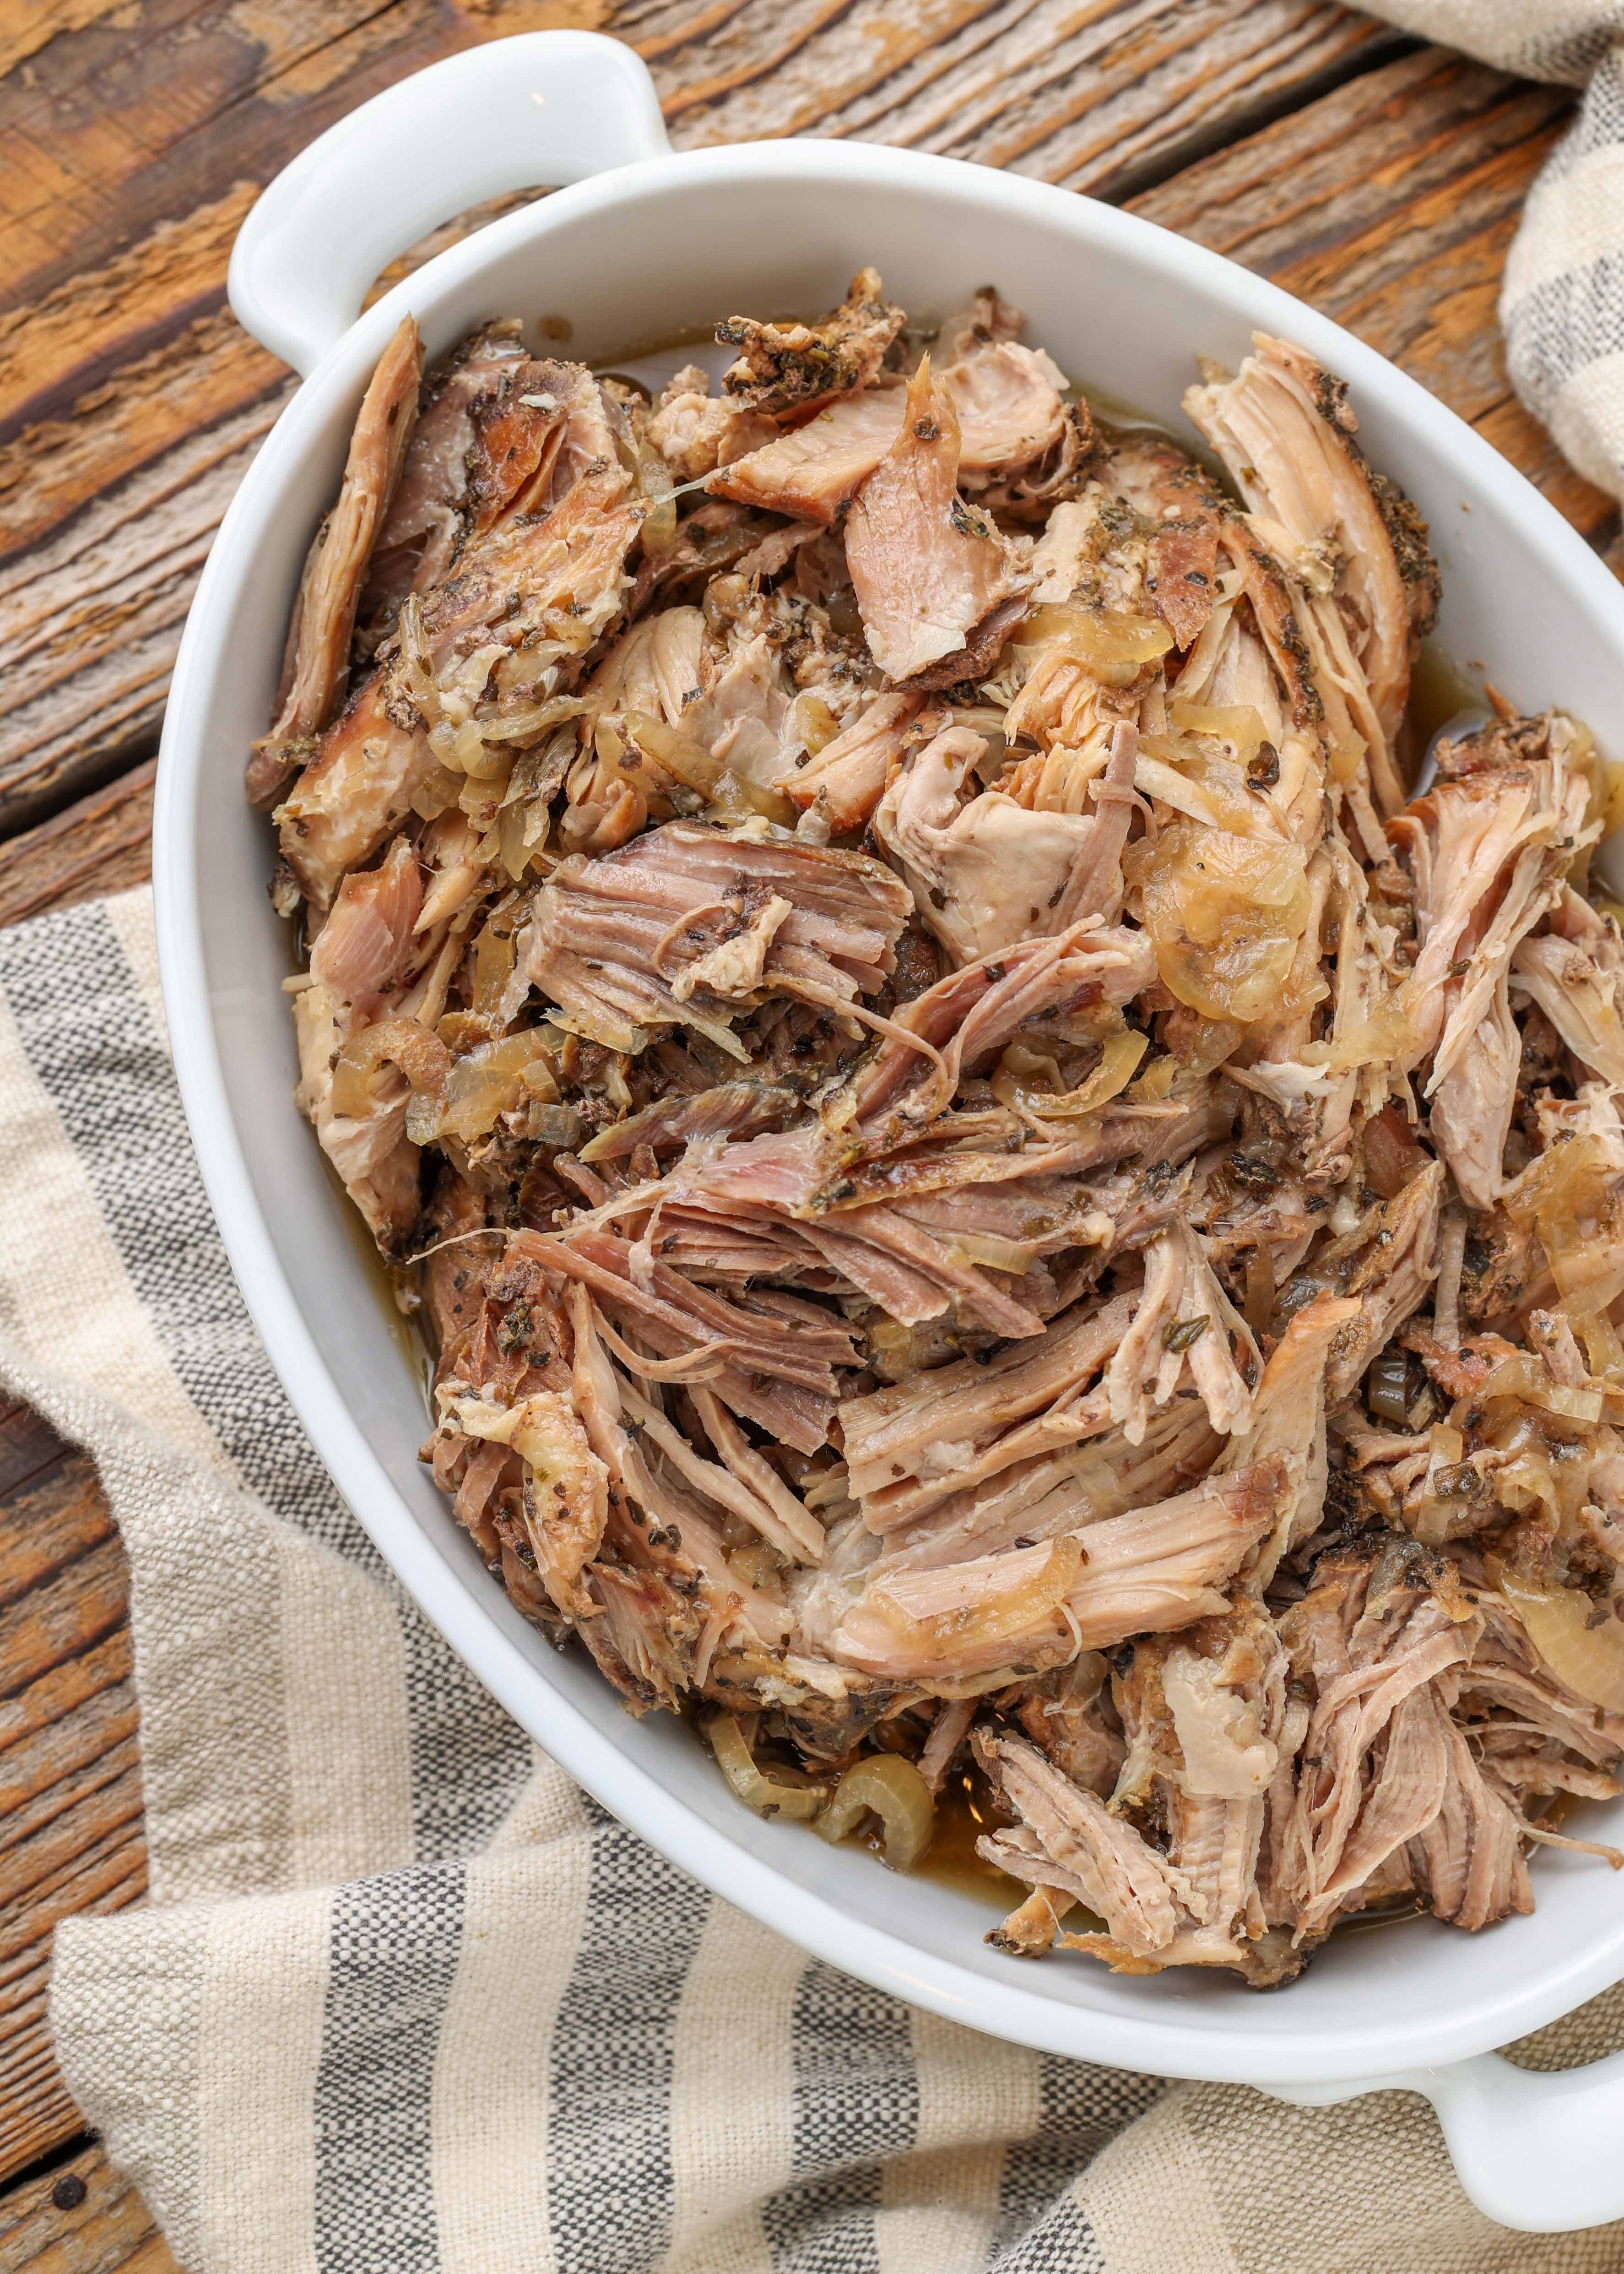 The Best Slow Cooker Pulled Pork Recipe - The Kitchen Girl